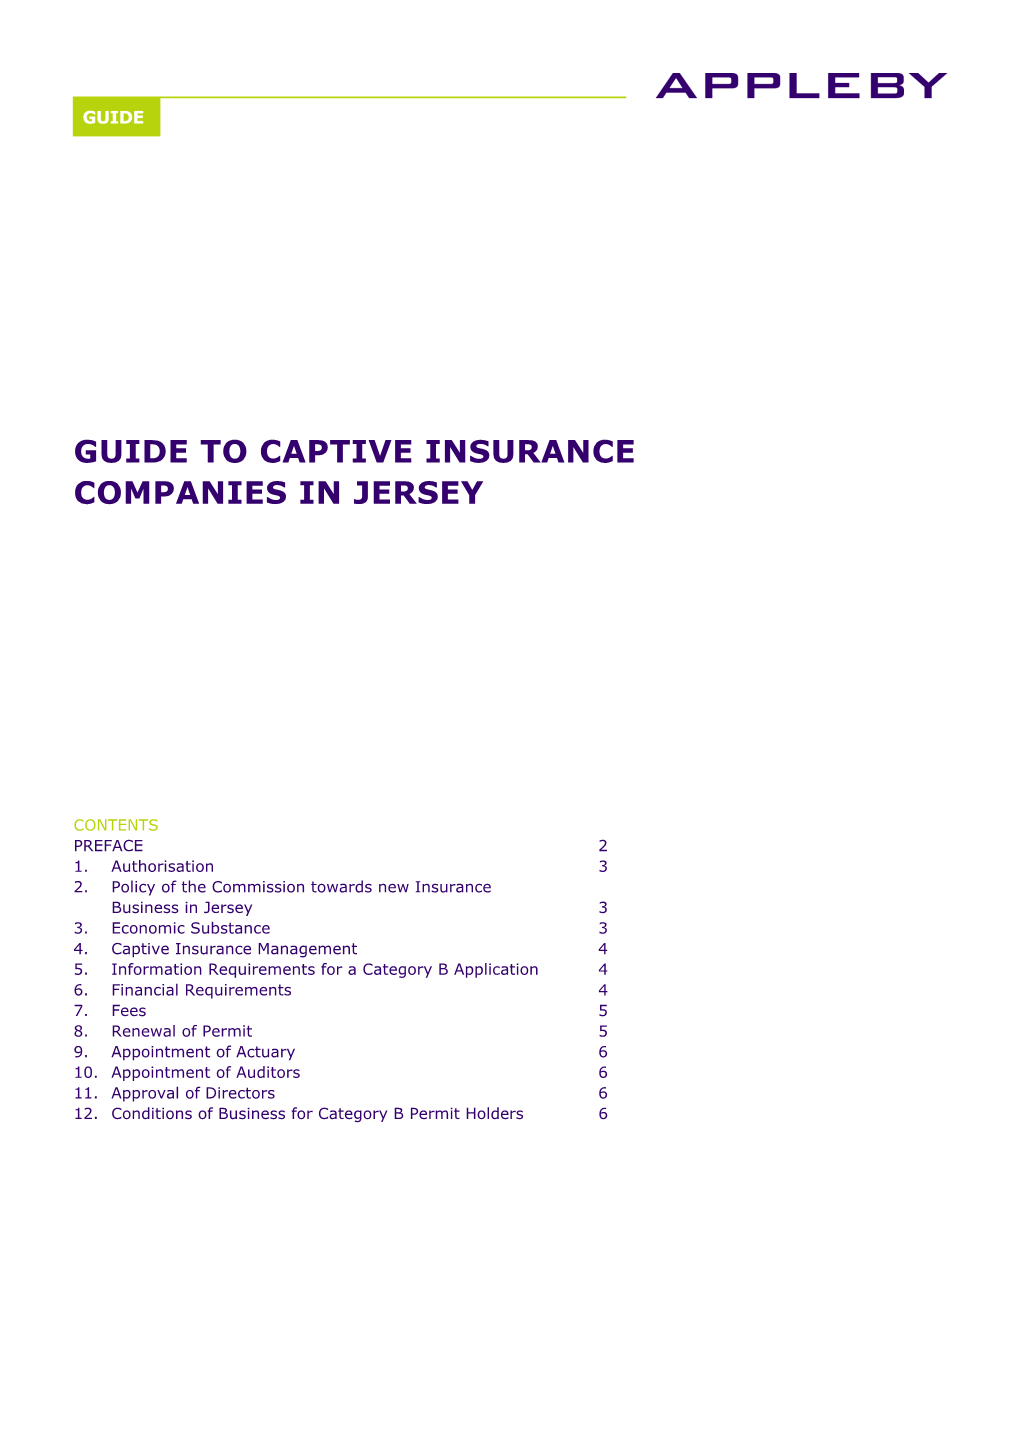 Guide to Captive Insurance Companies in Jersey